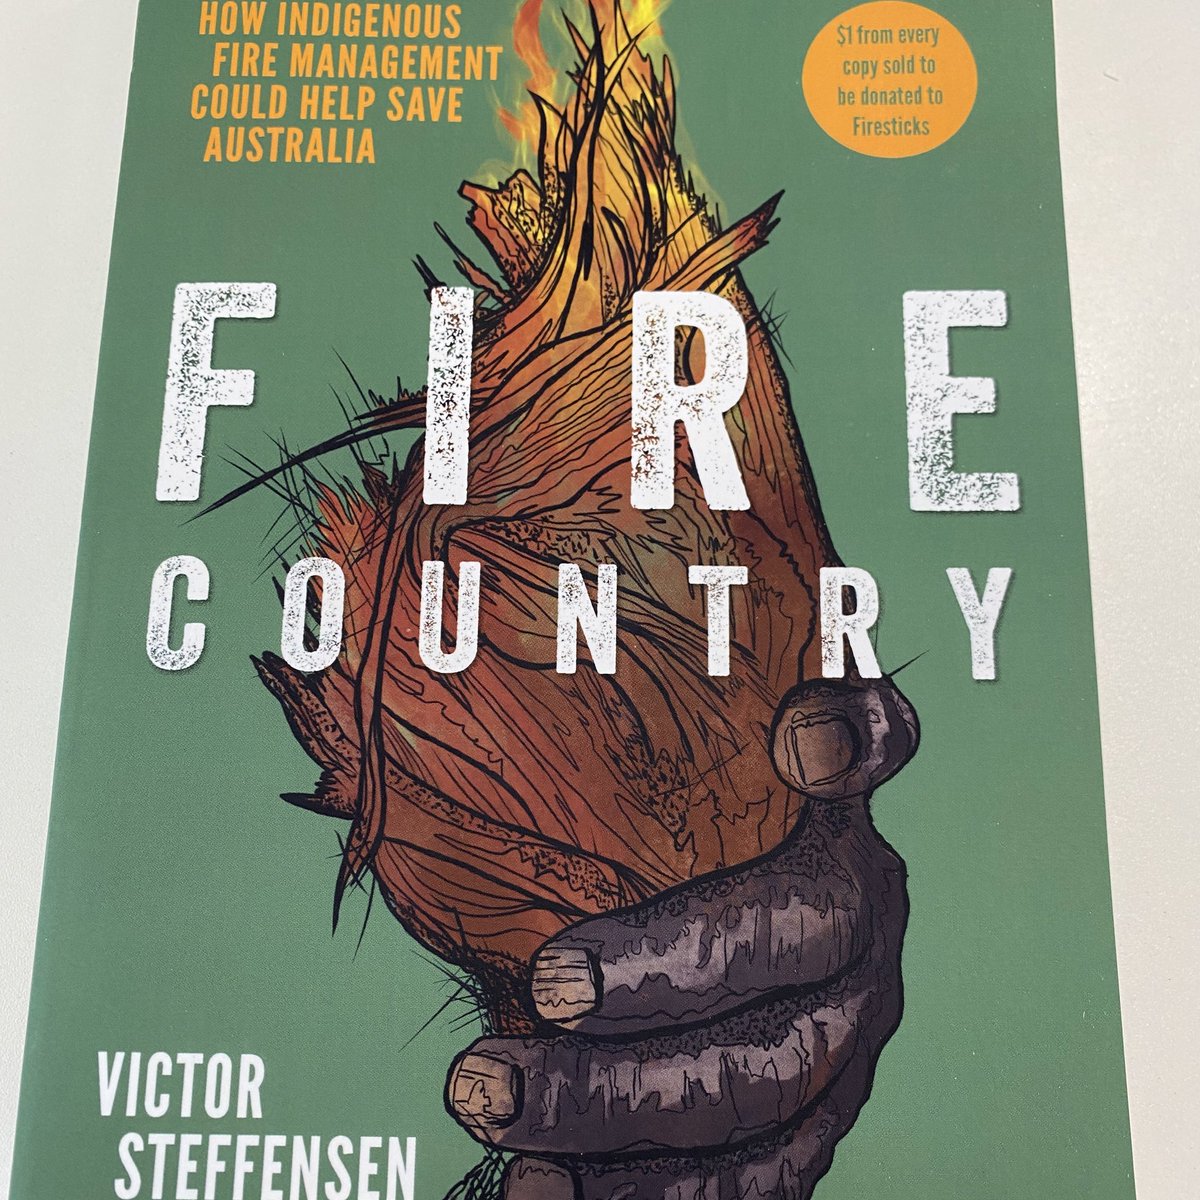 Looking forward to giving @V_Steffensen book ‘Fire Country’ a good read #culturalburning #hazardreduction #bushfires